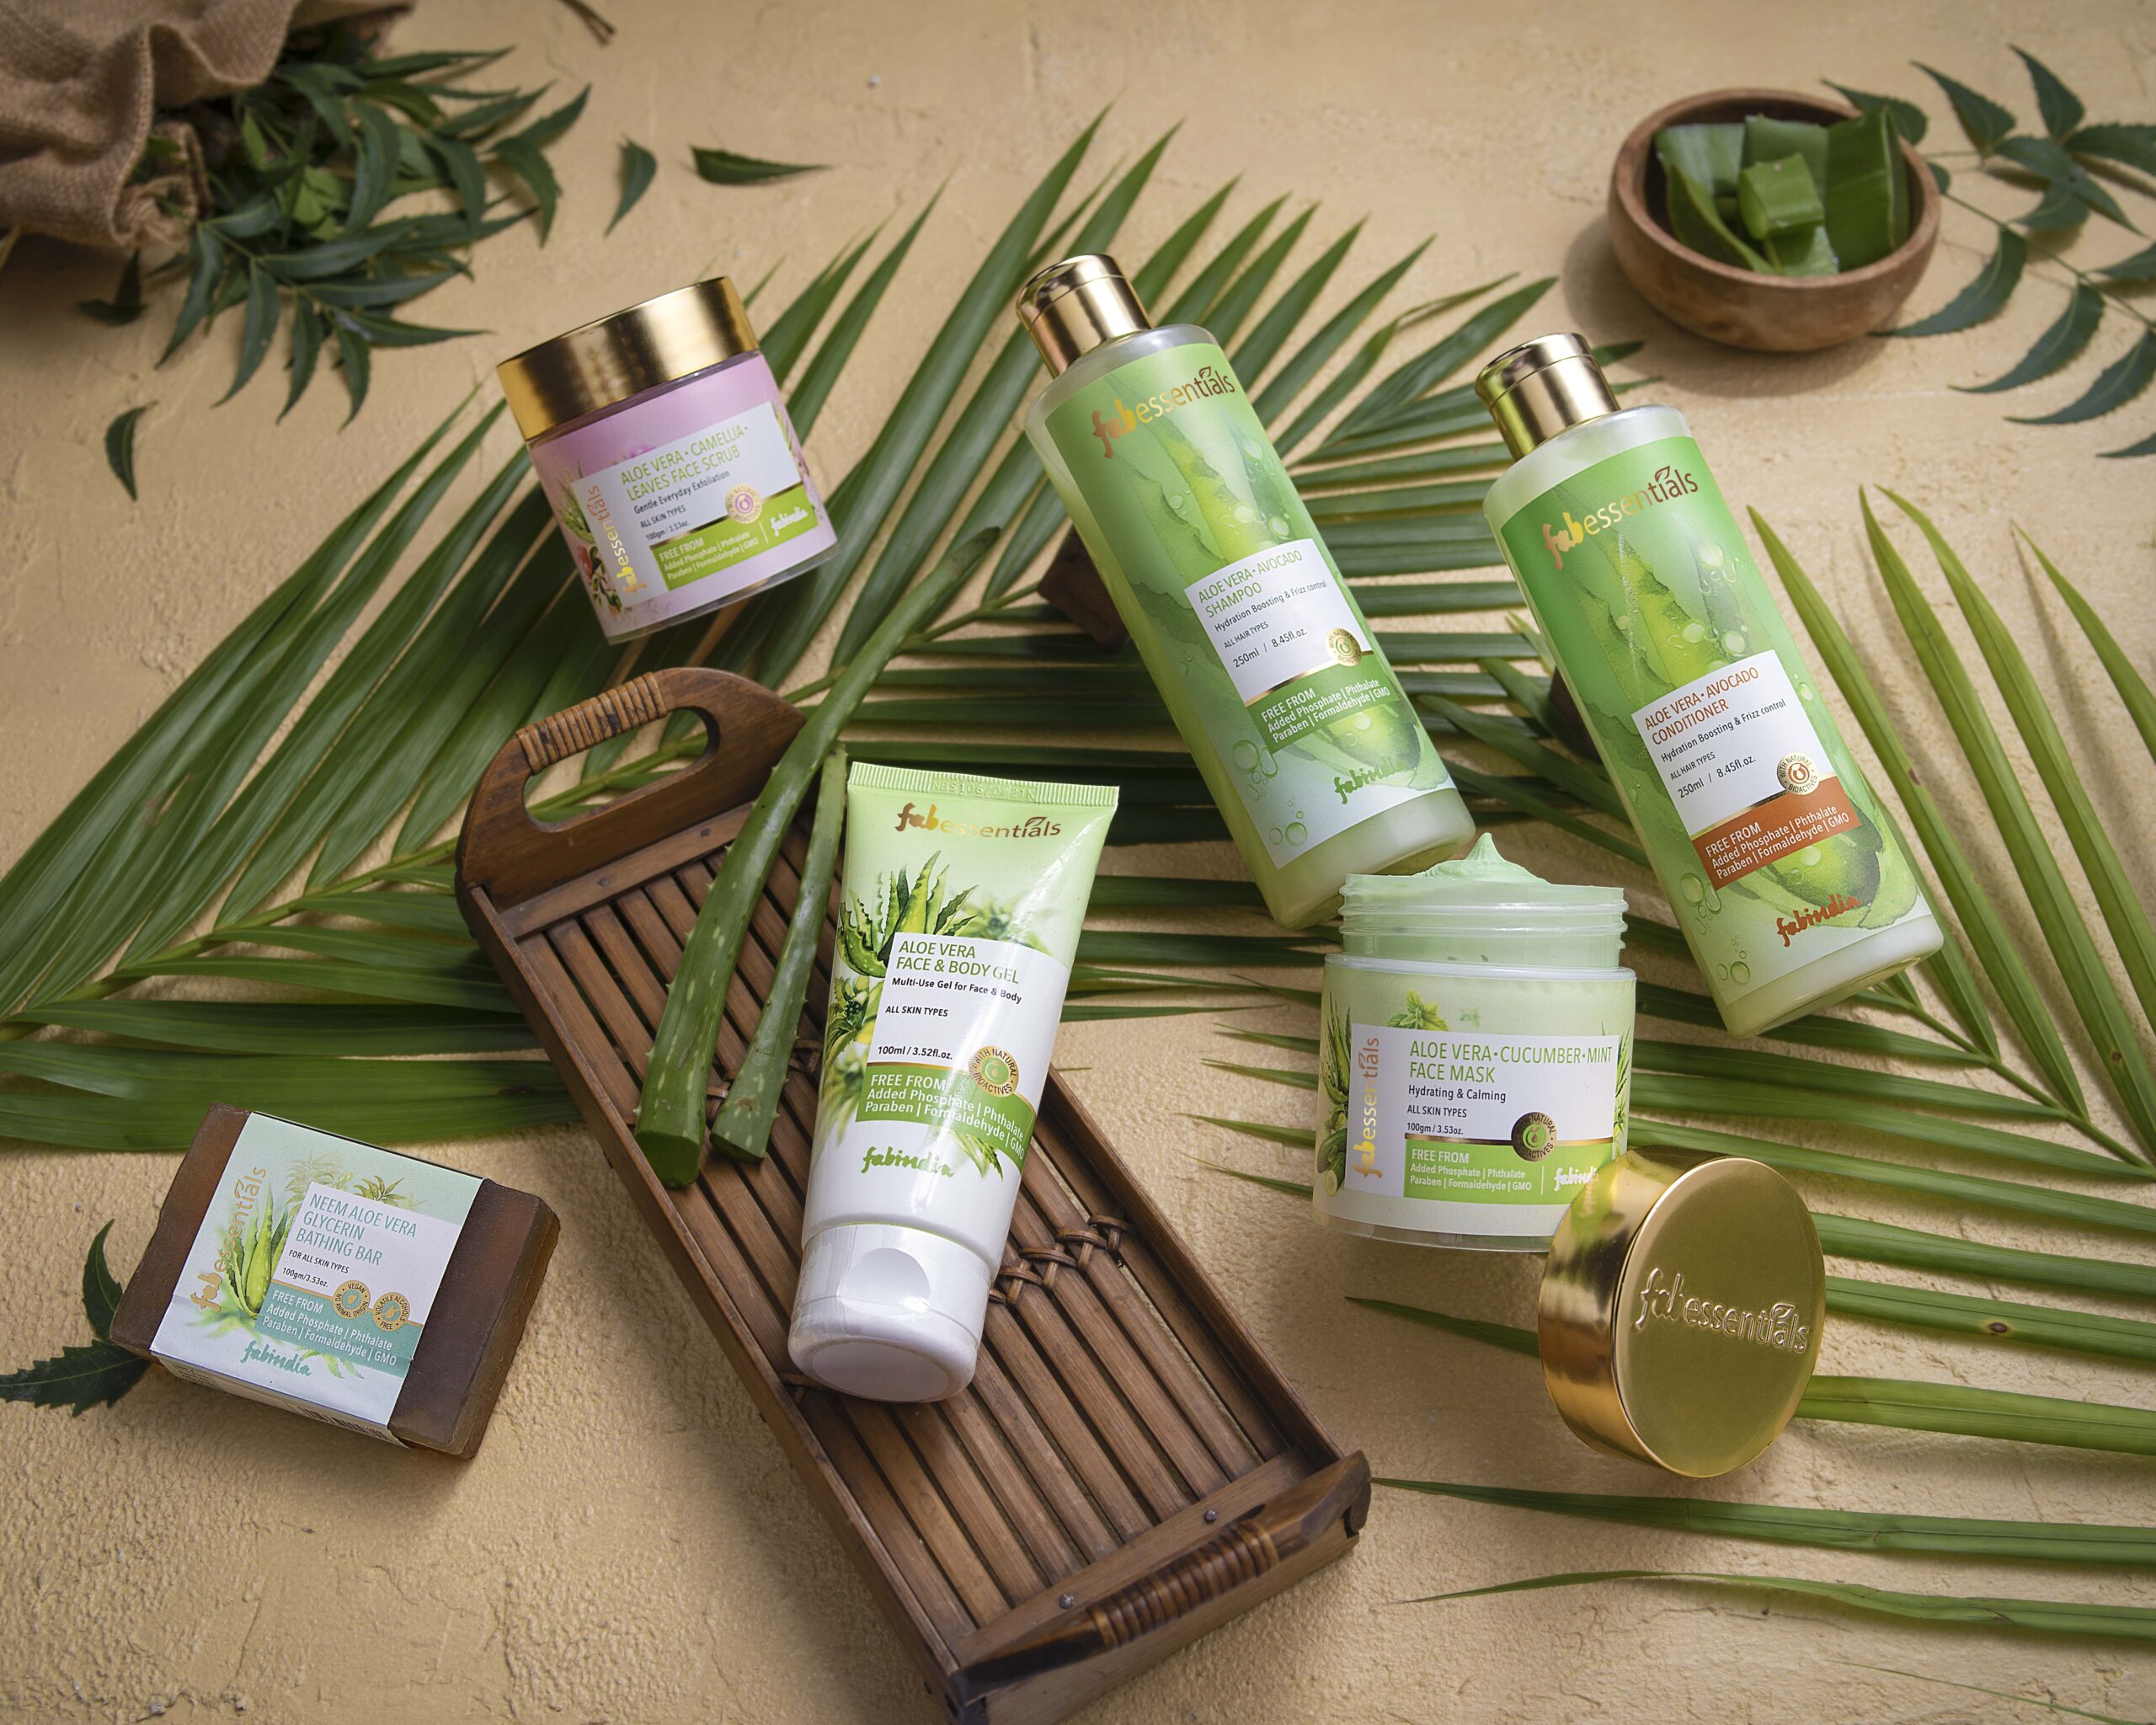 Fabindia Launches Fabessentials: An Immersive Personal Care Range